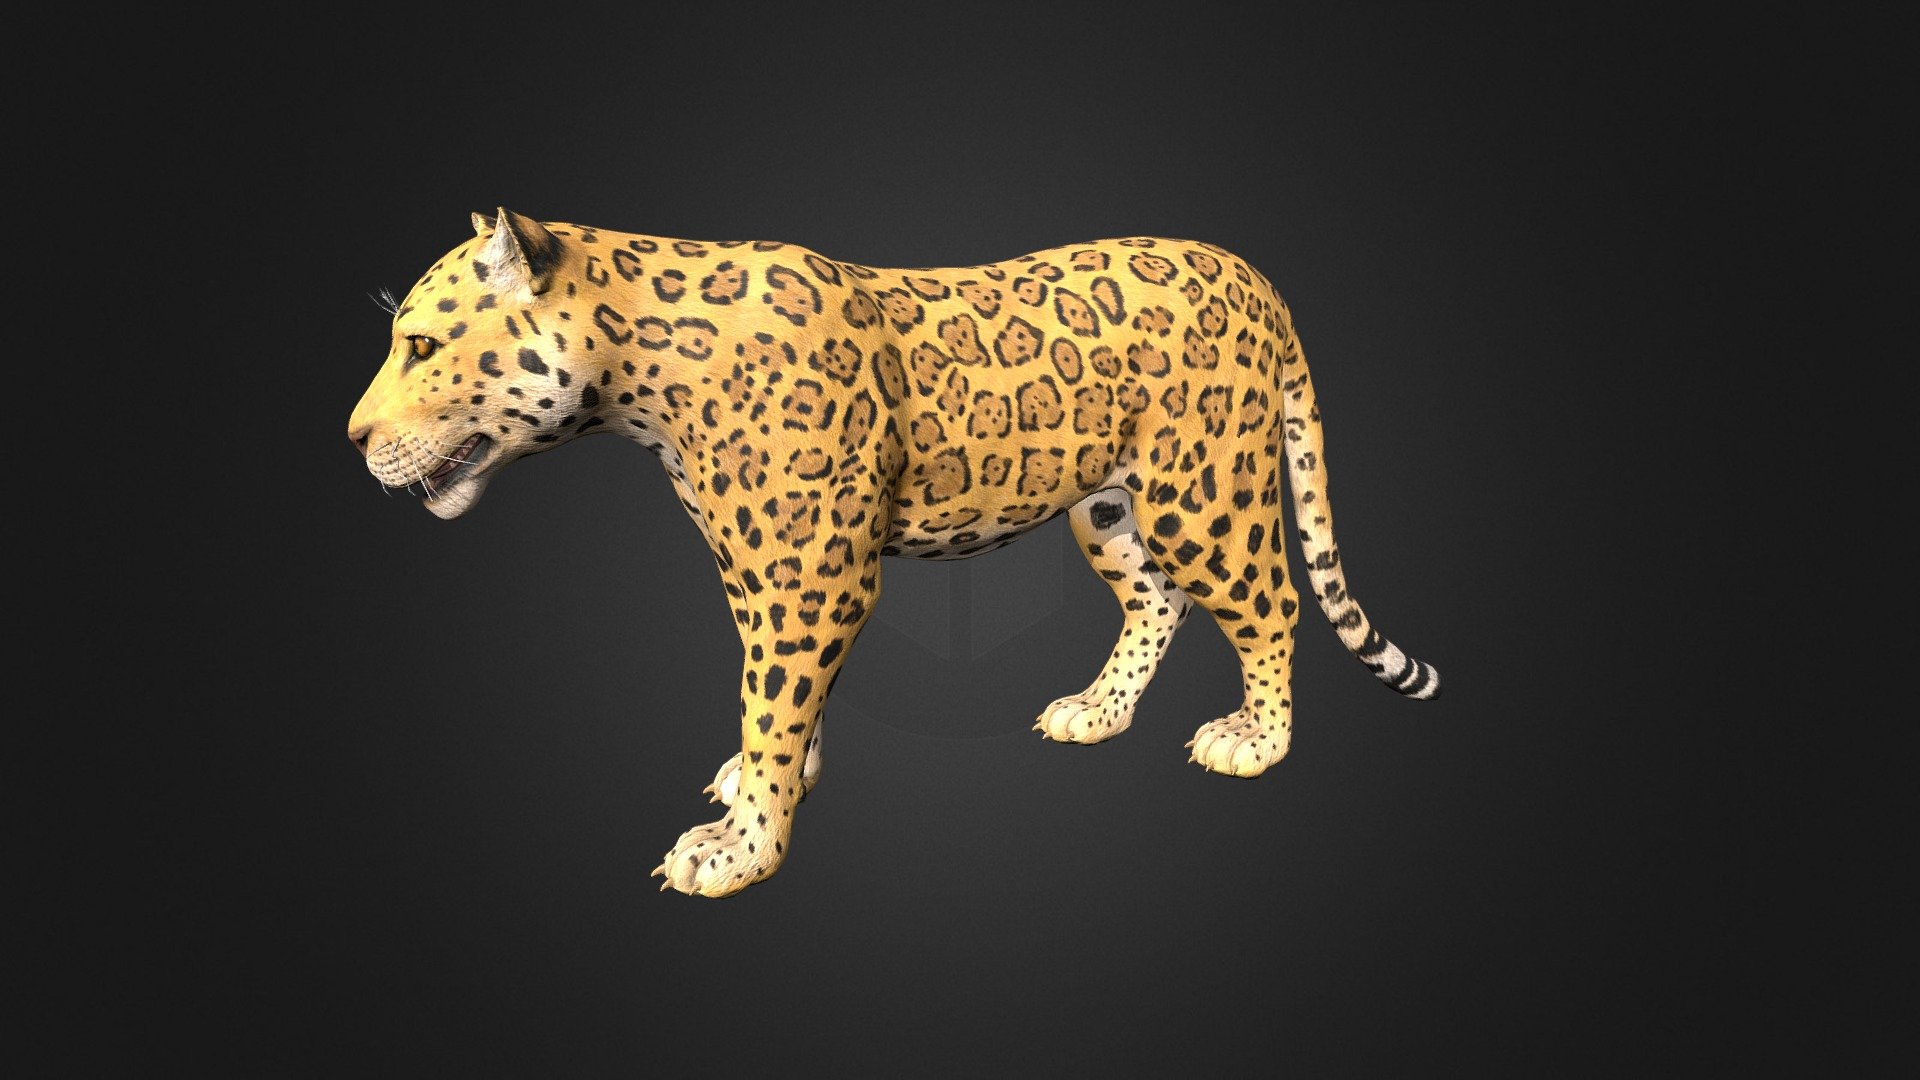 This asset has Jaguar model.

Model has 4 LOD.




25750 tris

17000 tris

8950 tris

6000 tris

Diffuse, normal and metallic / roughness maps (all maps 2048x2048).

The model has 2 types of color.

76 animations (IP/RM)

Attack(1-3), walk (F,FL,FR,B,BL,BR), Run (F,FL,FR), Run_Jump, Trot (F,FL,FR), Swim (F,FL,FR,B,BL,BR), Swim_Idle, Swim_turn(Left/Right), Jump_In_Place, Jump_F, Jump (start/landing), Jump_Loop (up, horisontal, down),Hit (F,M,B) , Lie (Start/end), Lie_Idle 1-3, Sleep (start, idle, end), Idle 1-3, death, eat, turn (left/right) etc.

If you have any questions, please contact us by mail: Chester9292@mail.ru - Jaguar - Buy Royalty Free 3D model by Darina3D 3d model